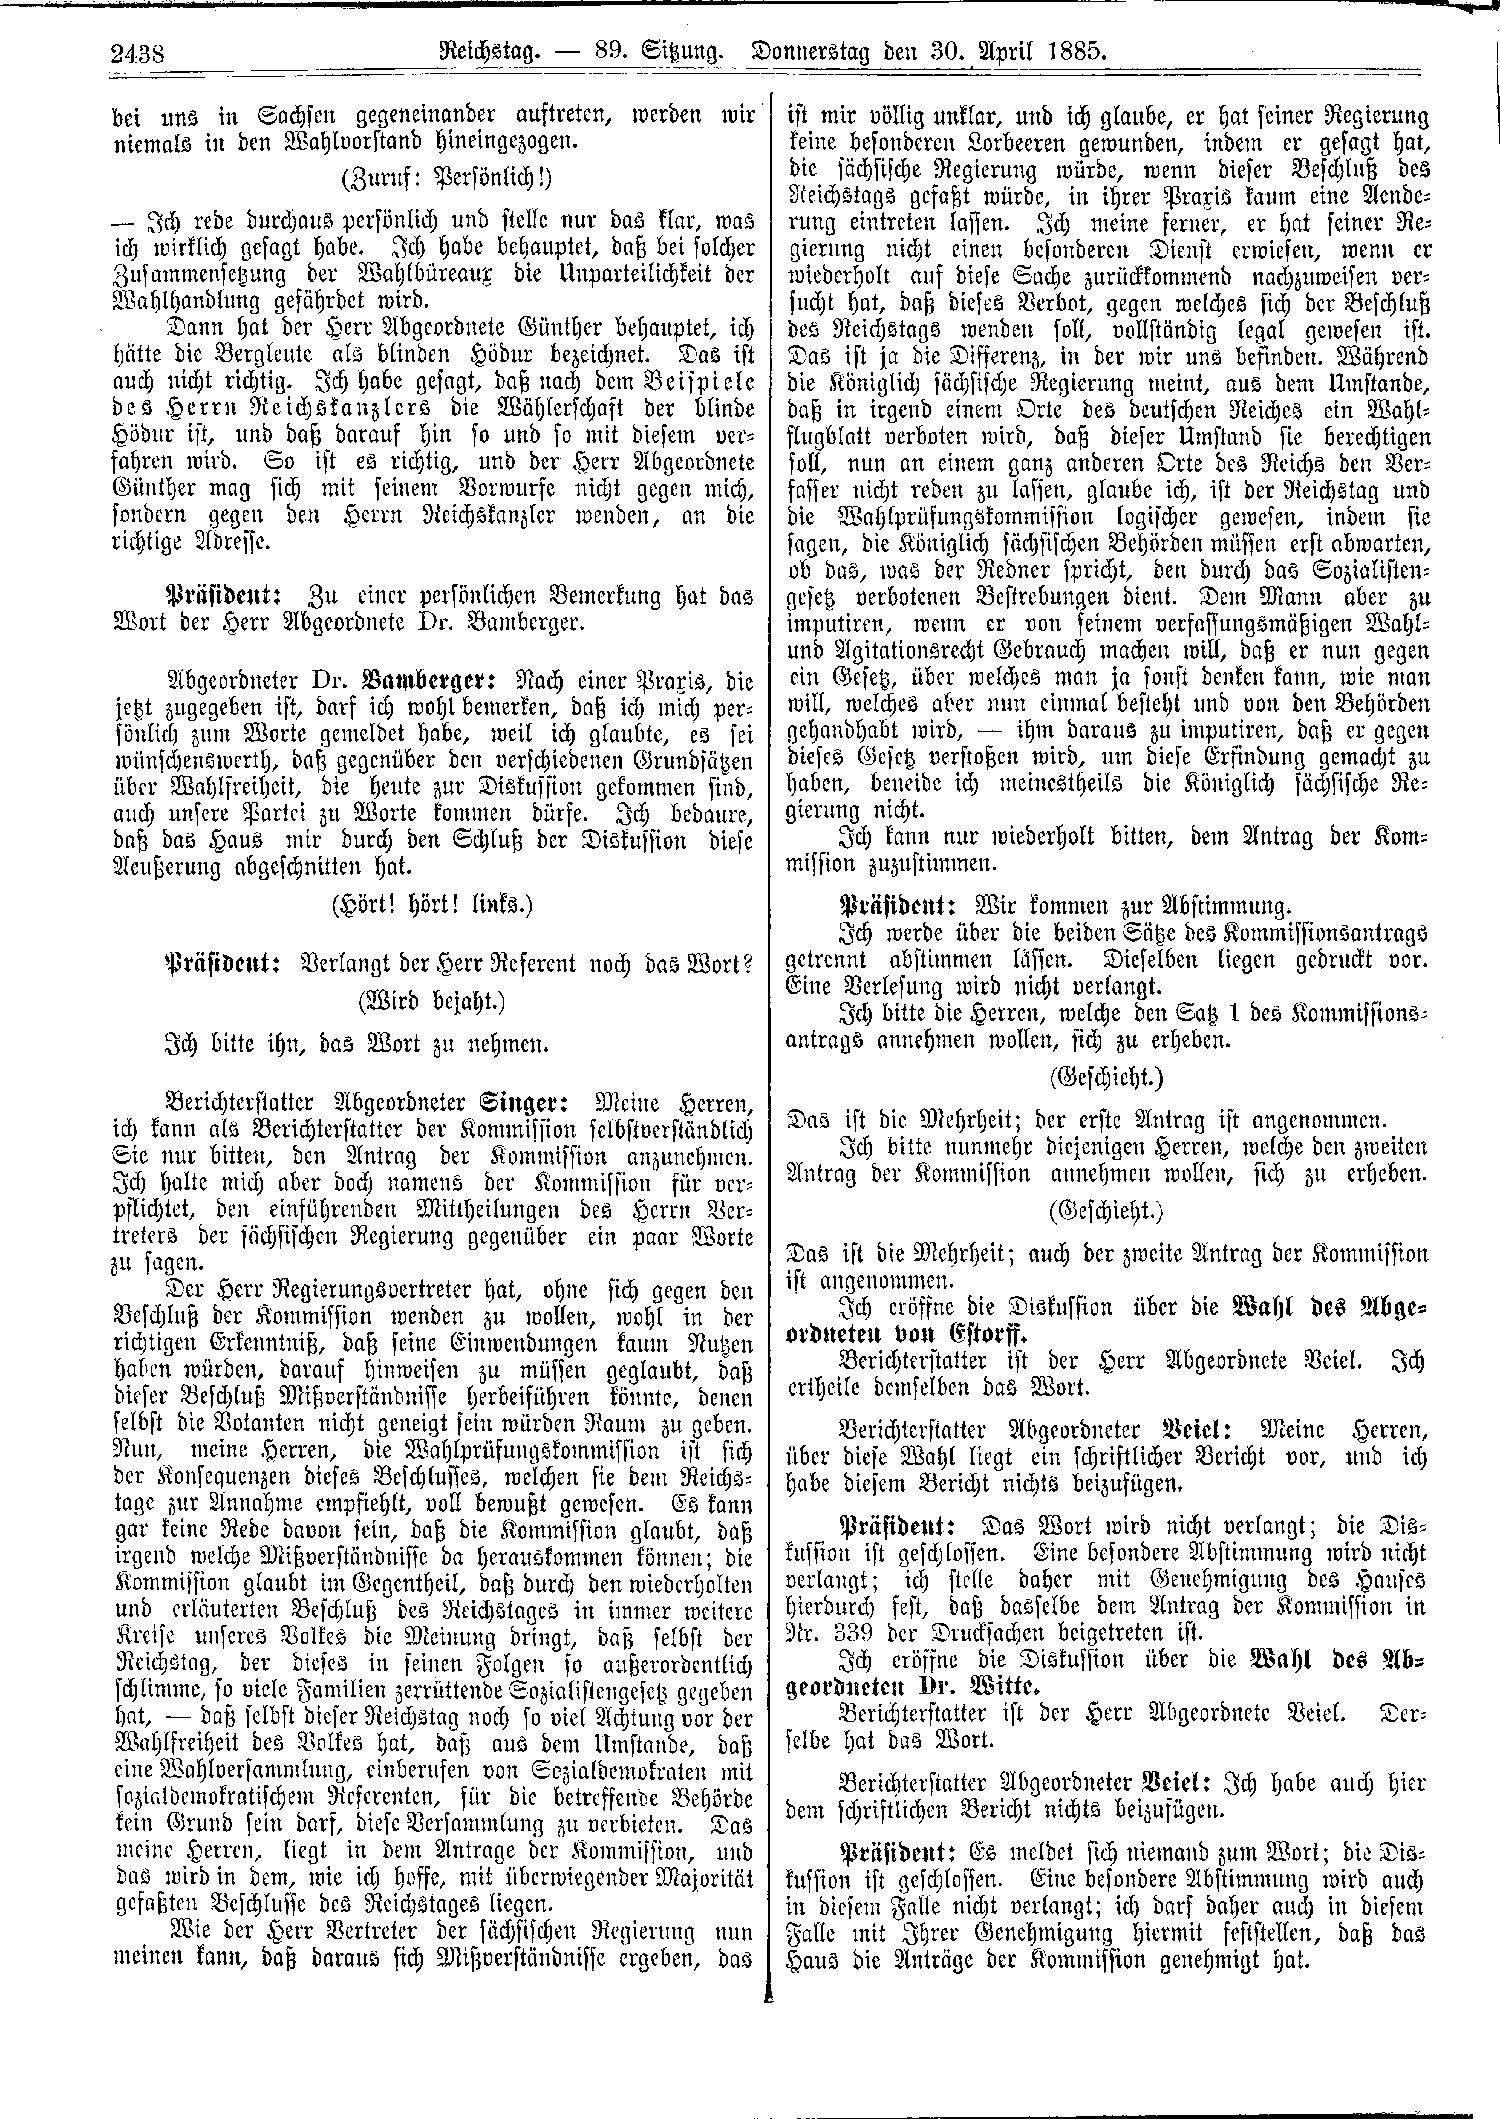 Scan of page 2438